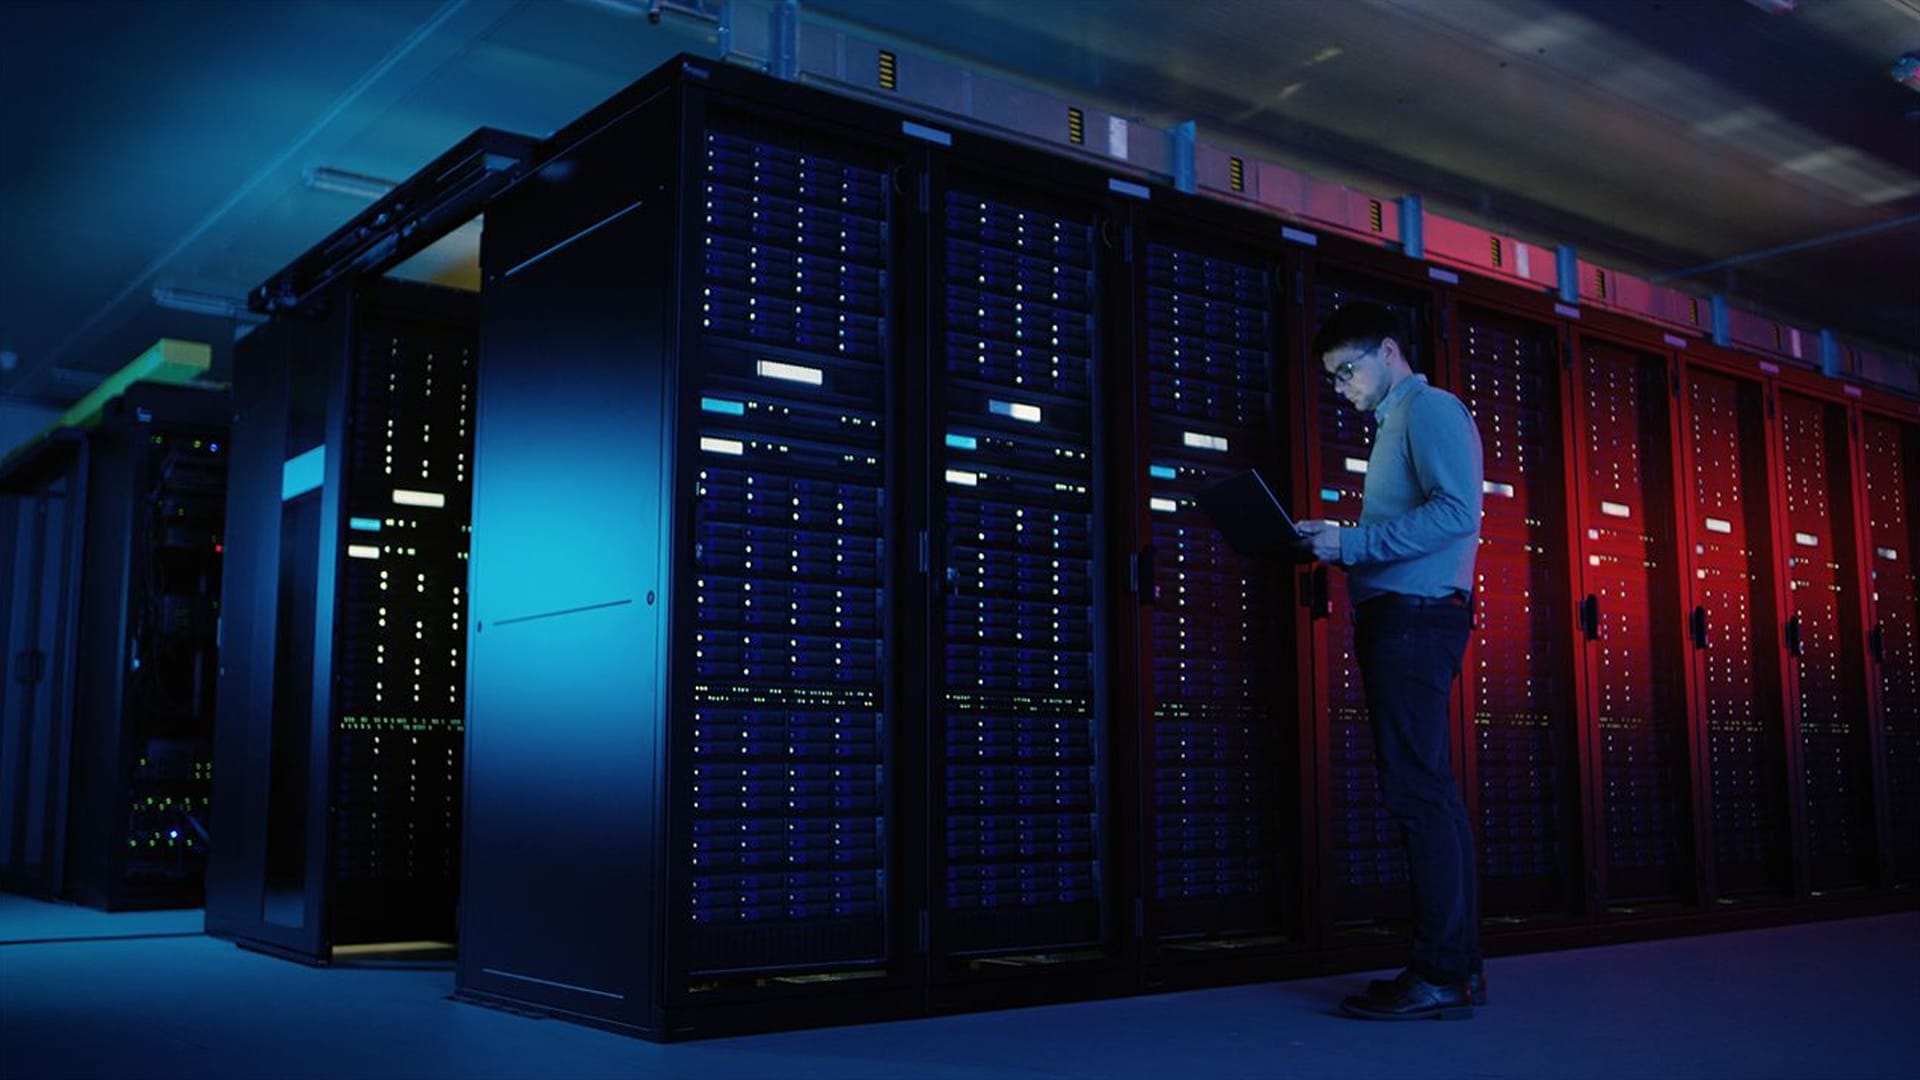 Young man in a data center with blue and red lighting